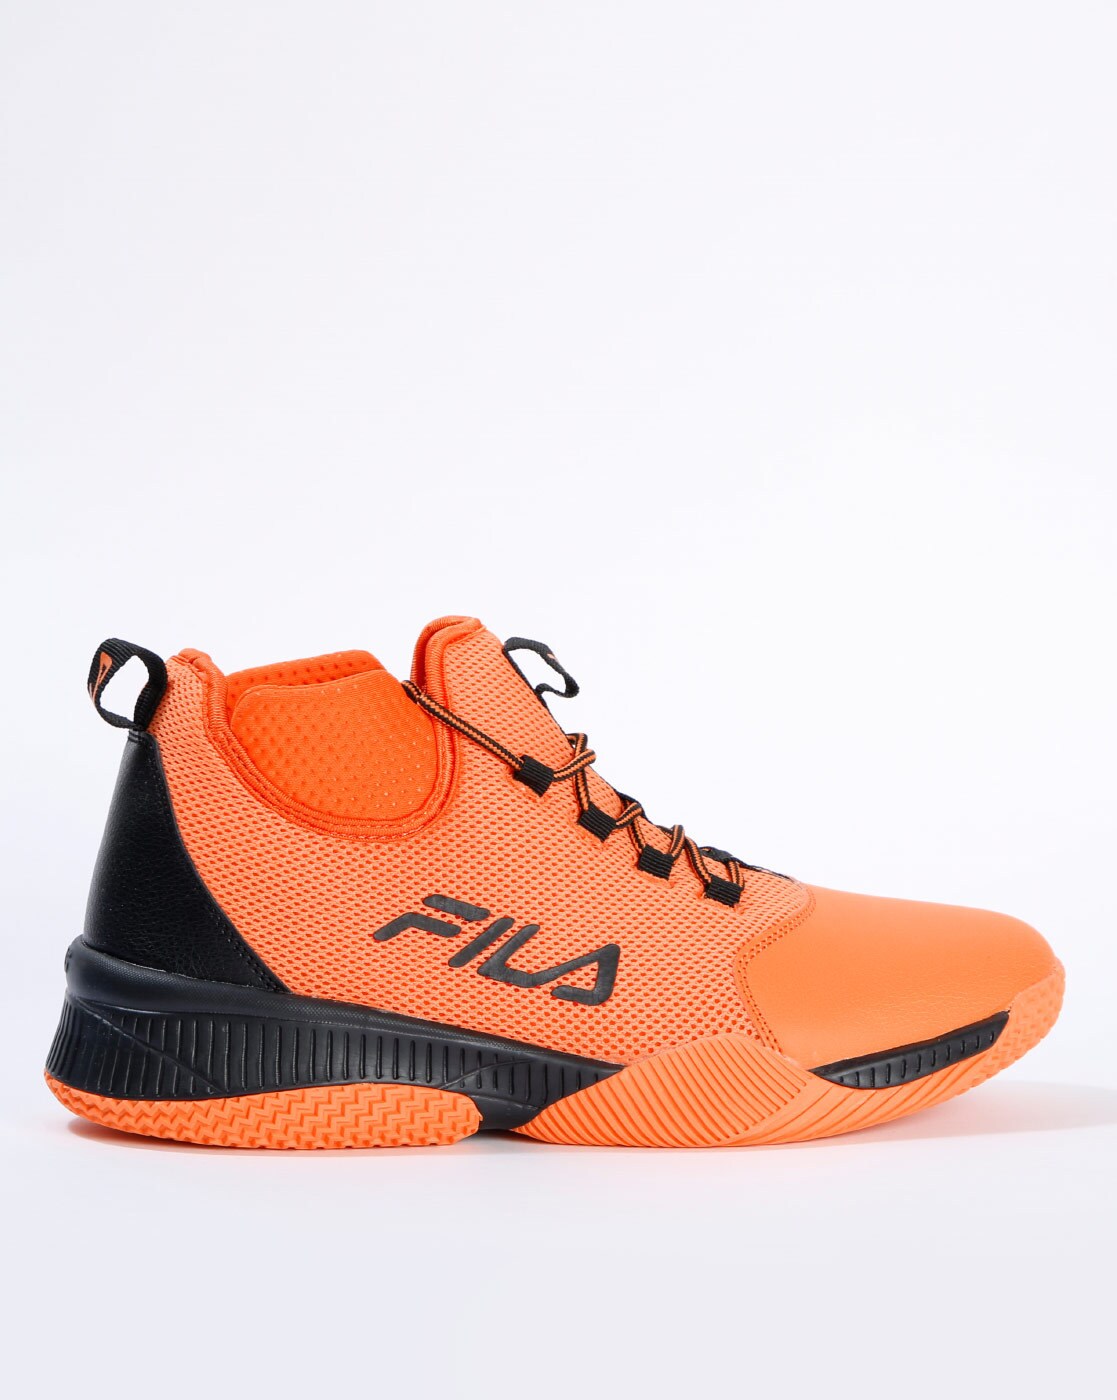 Buy Vulc 13 Patent Flag Sneakers Men's Footwear from Fila. Find Fila  fashion & more at DrJays.com